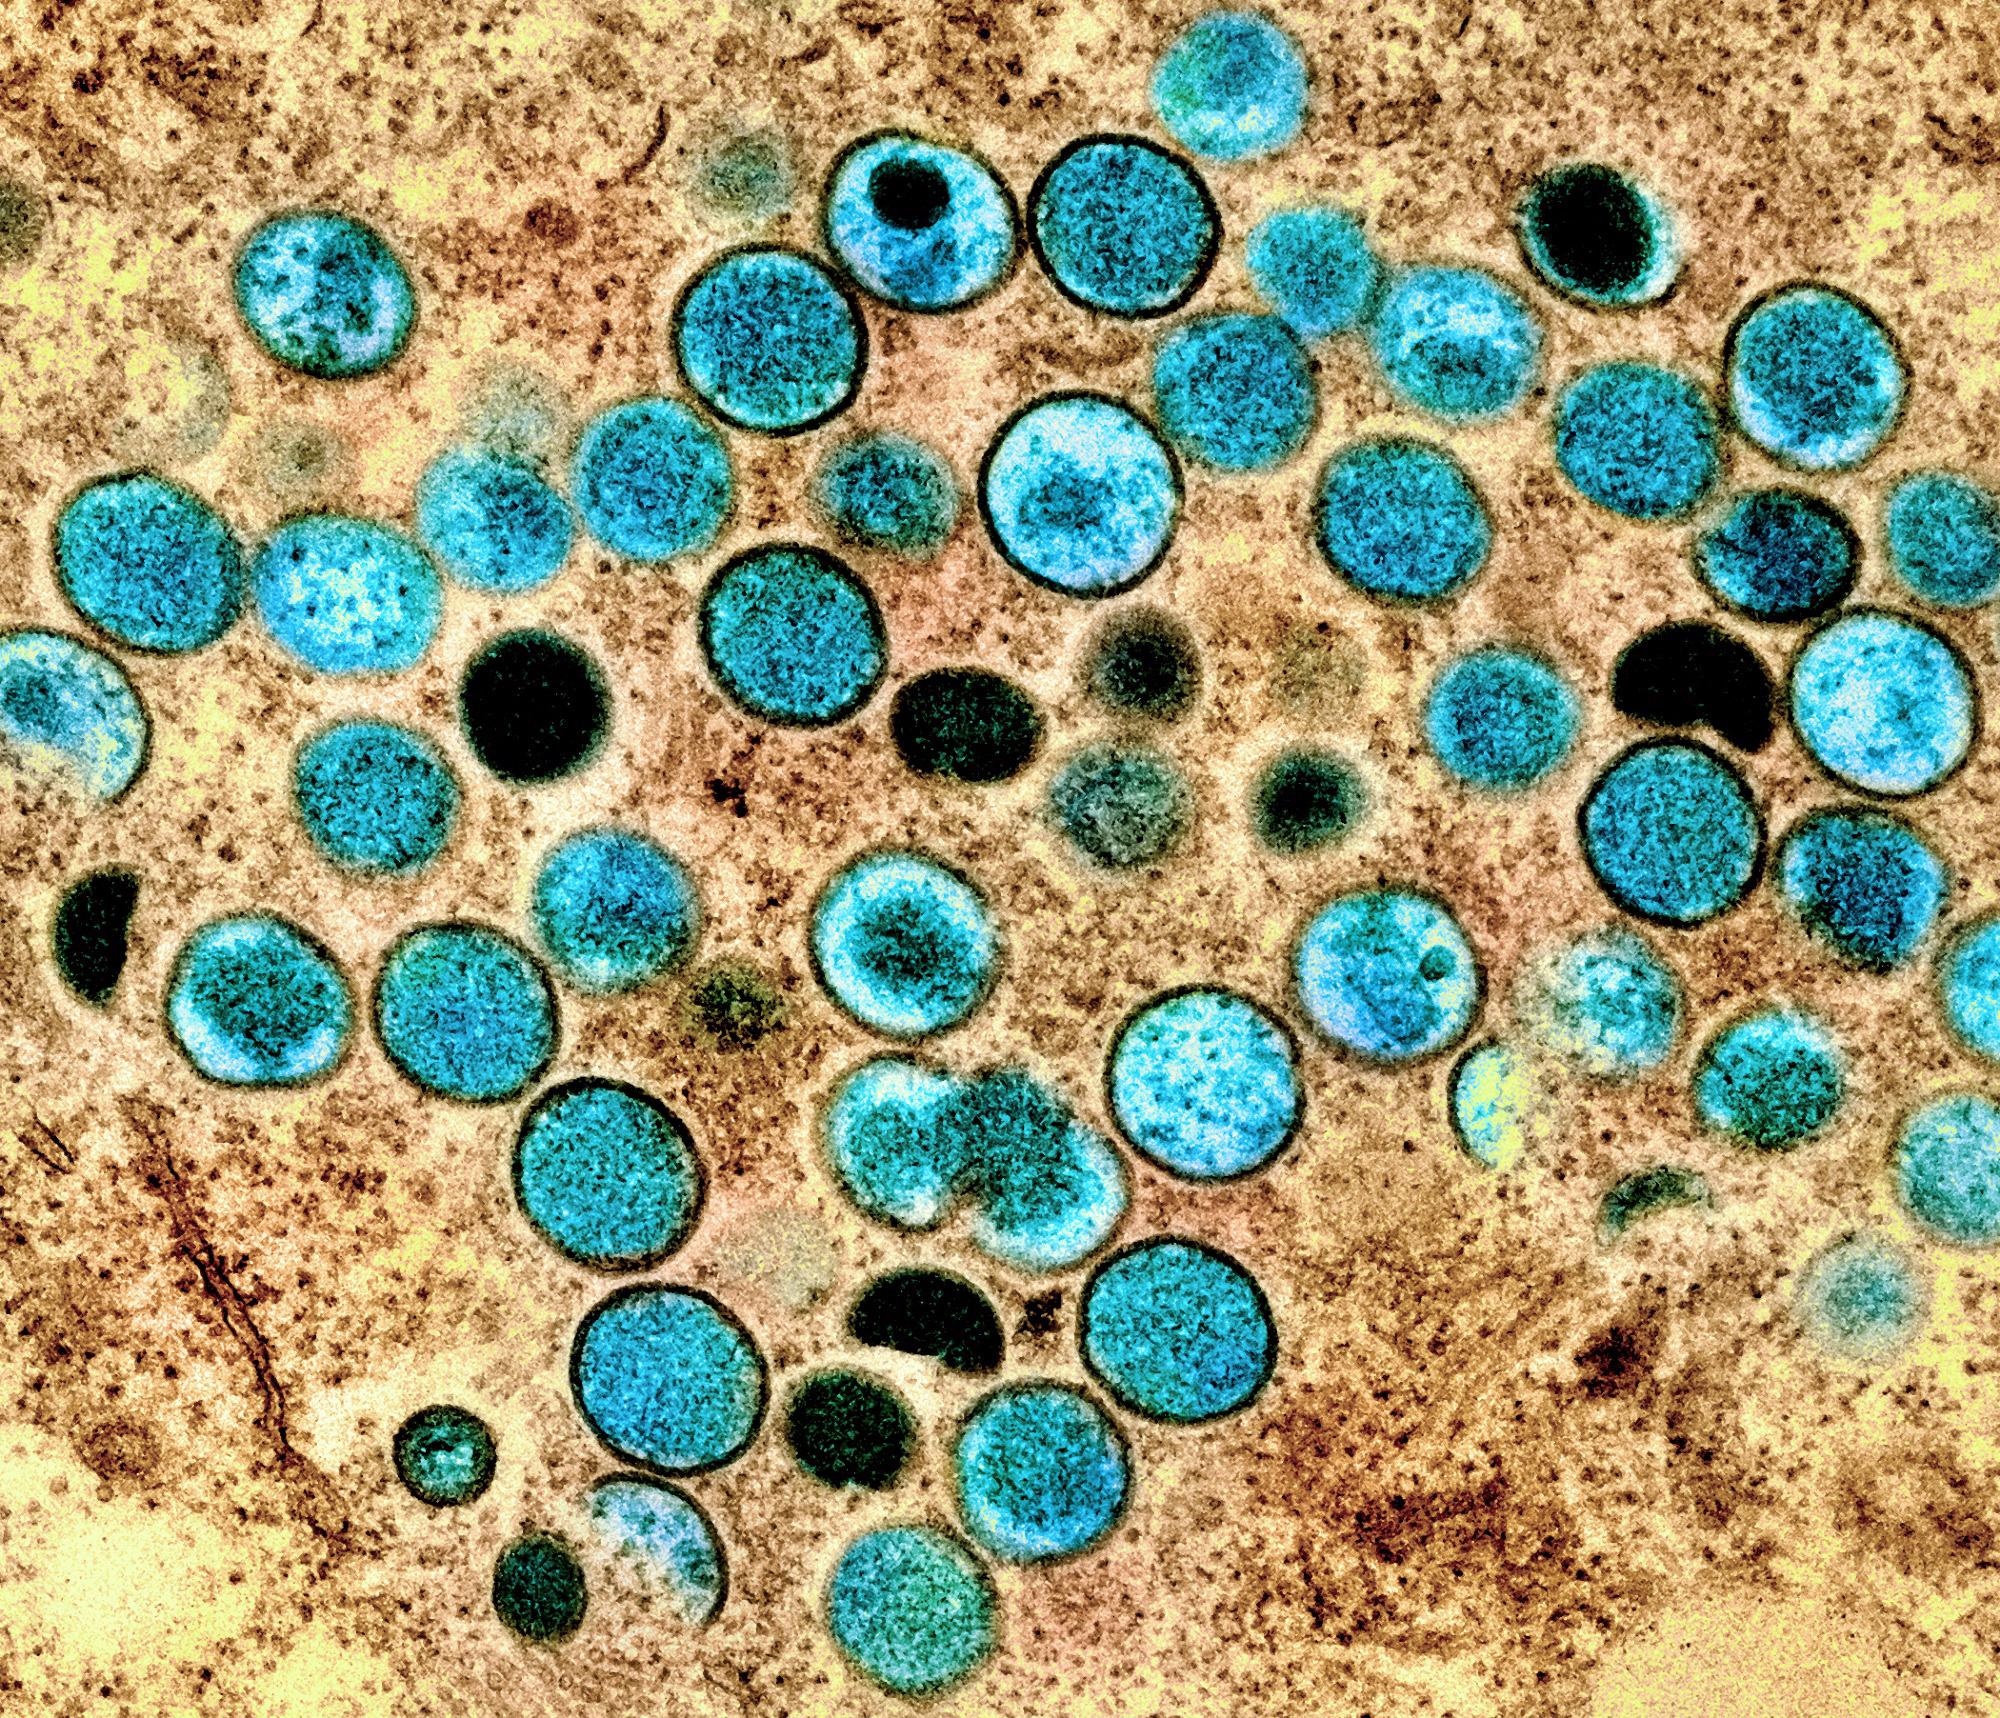 Study: Multiple lineages of Monkeypox virus detected in the United States, 2021- 2022. Image Credit: NIAID